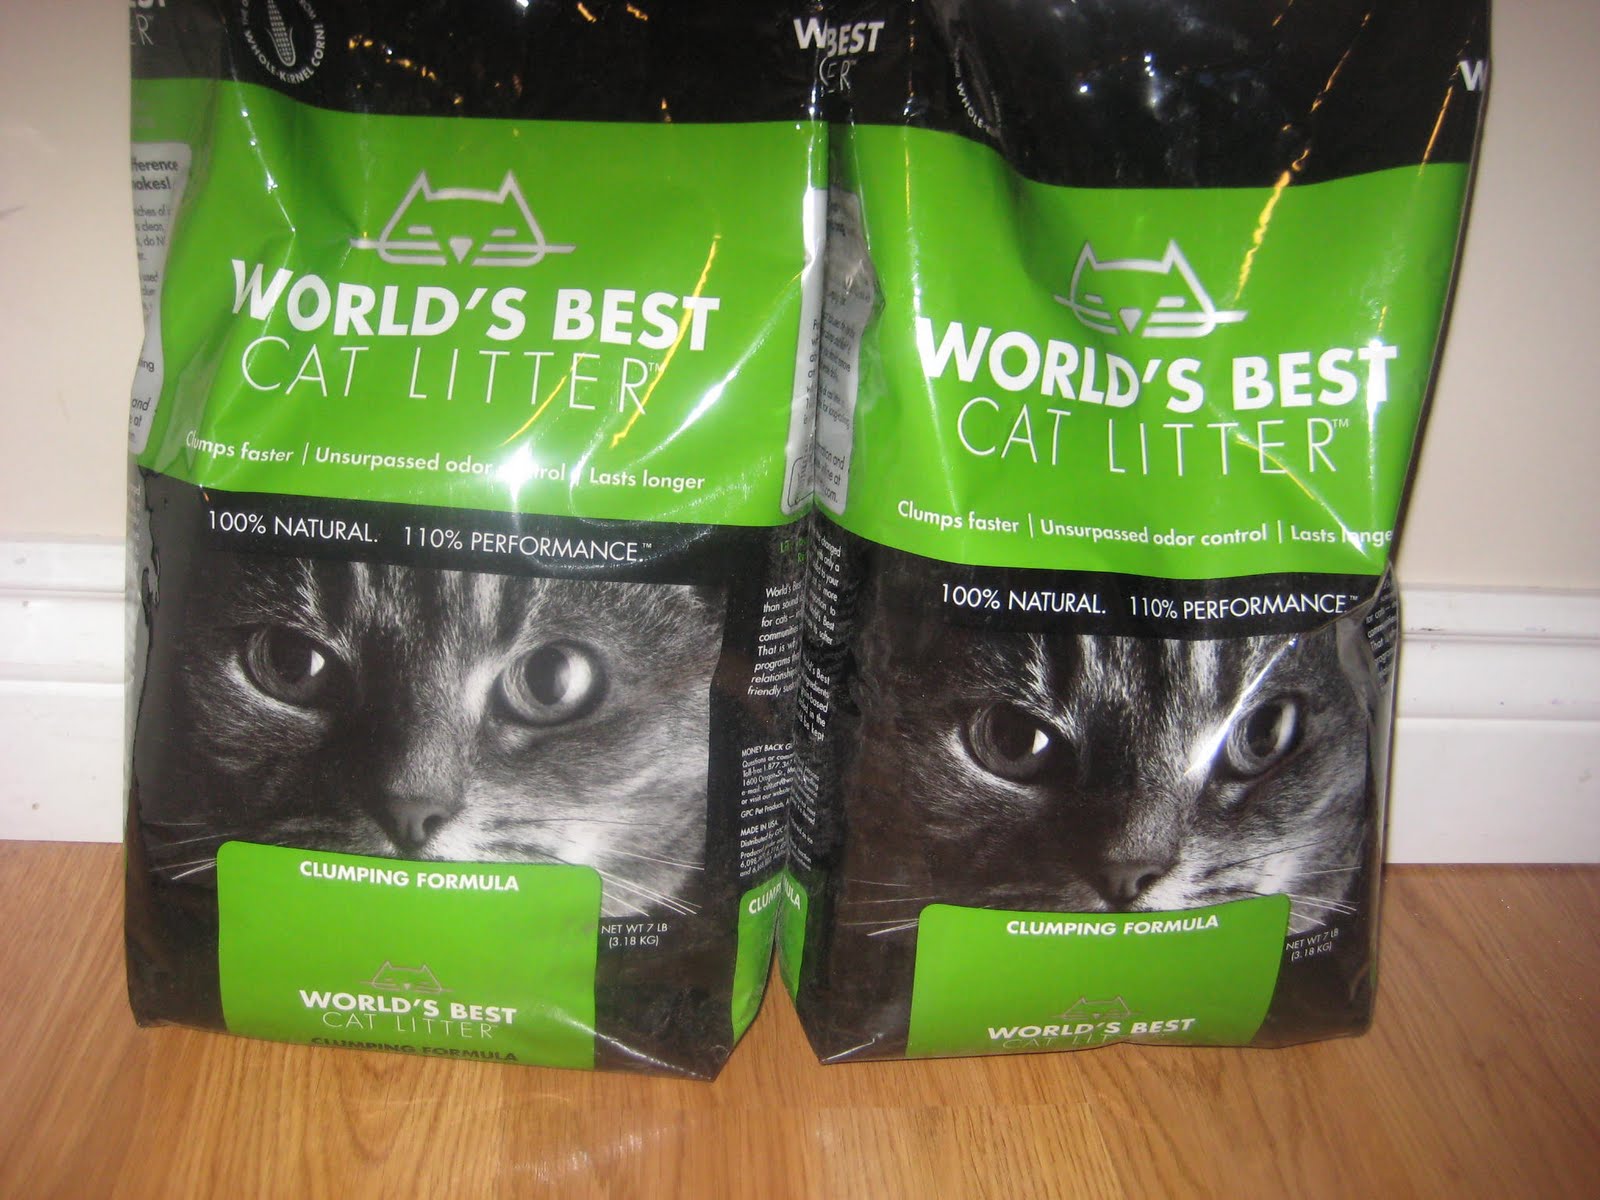 World's Best Cat Litter Review & Giveaway